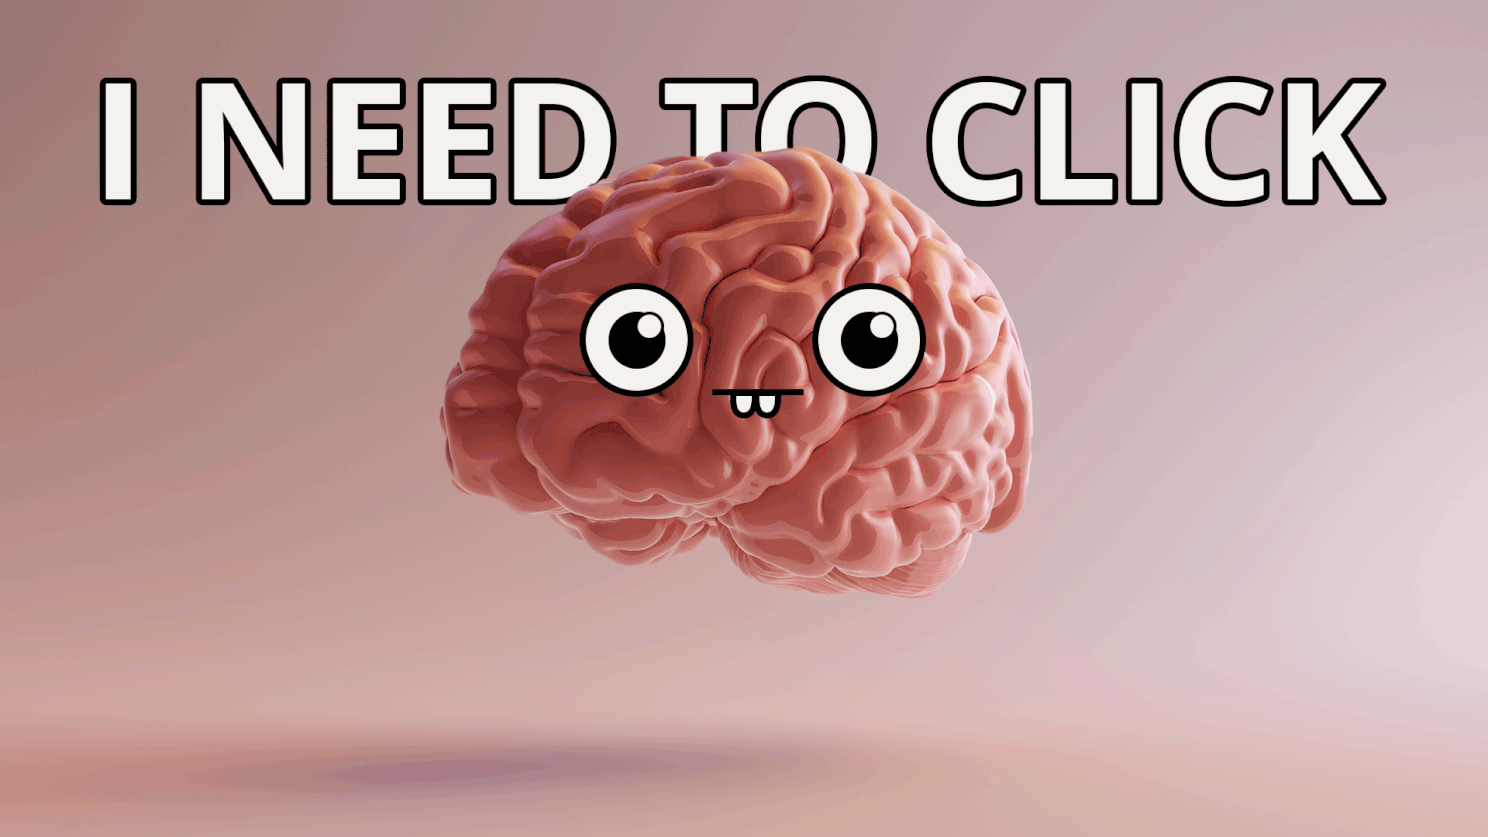 A crazy brain saying “I need to click”.